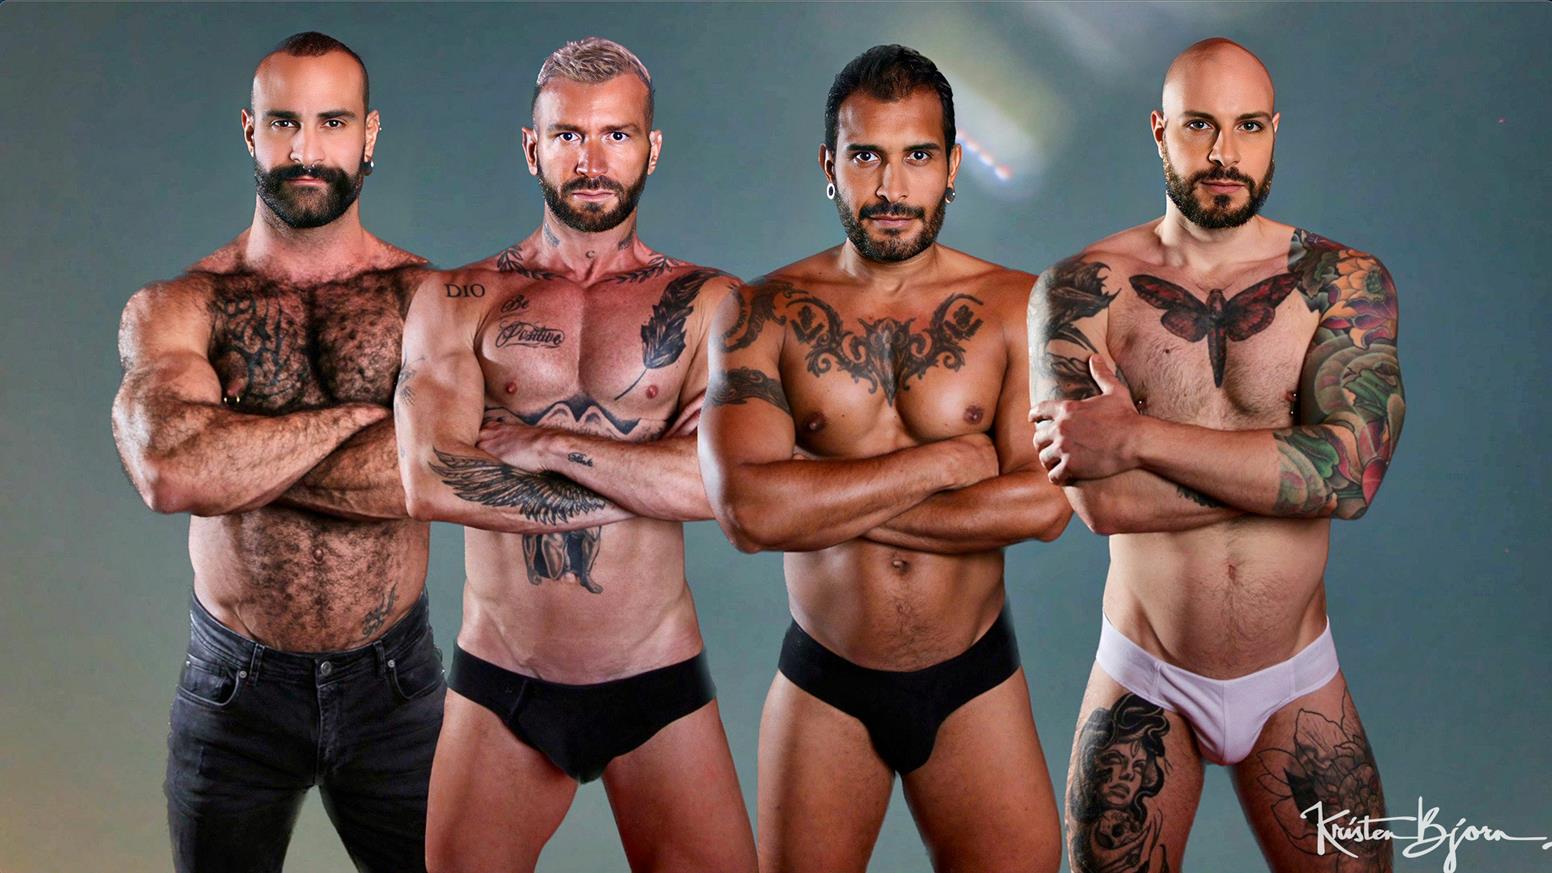 KristenBjorn - THE RIGHT PLACE - Paco Rabo, Lucio Saints, Blue Eyes XL, Ares (26)